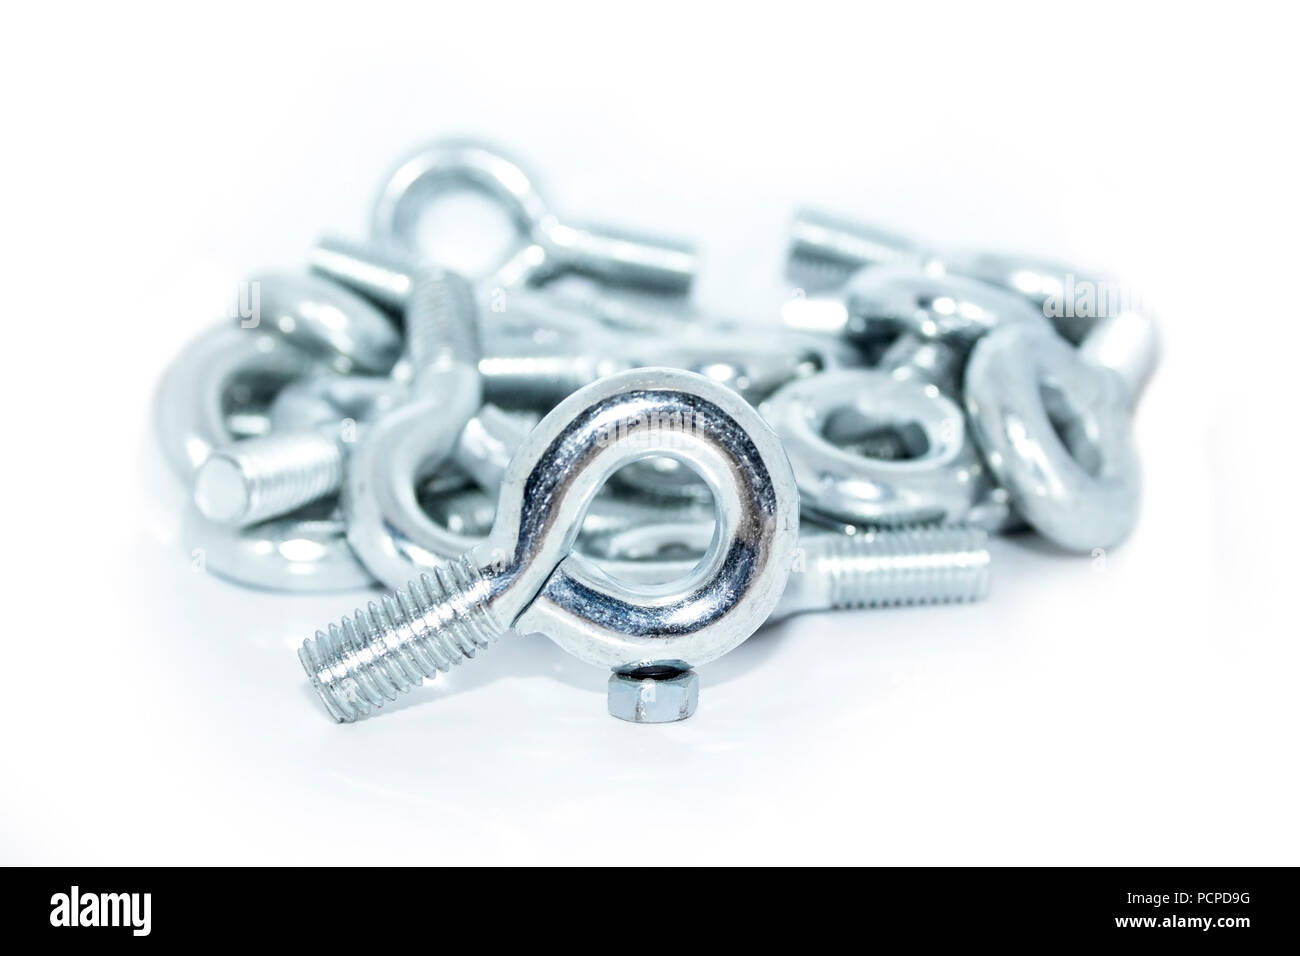 Lots of big industrial galvanized eye bolts on a pile with white background Stock Photo